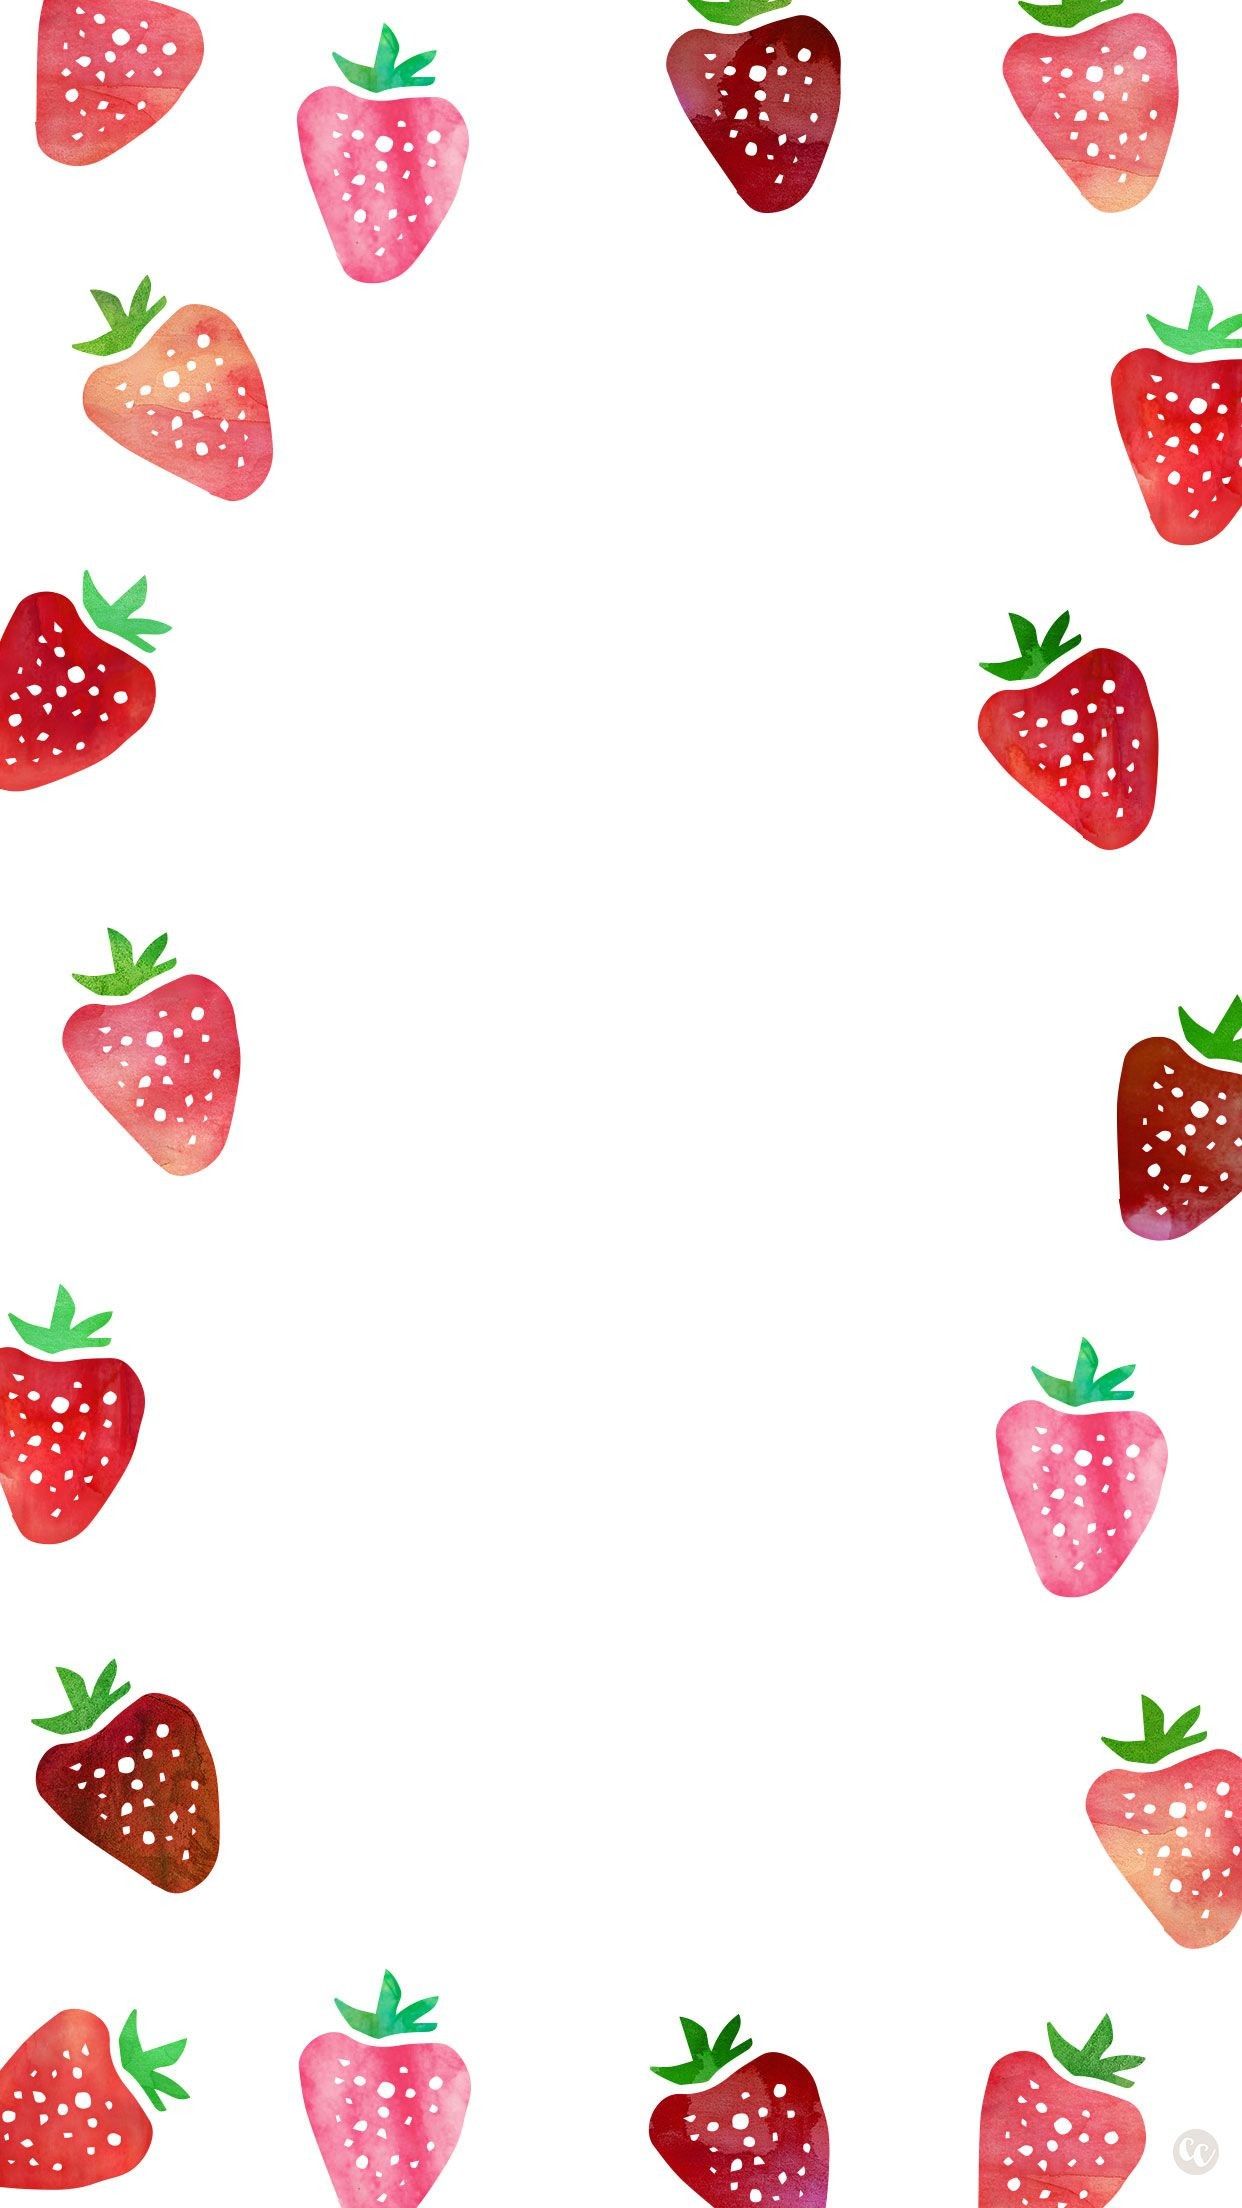 Cute aesthetic strawberry wallpapers